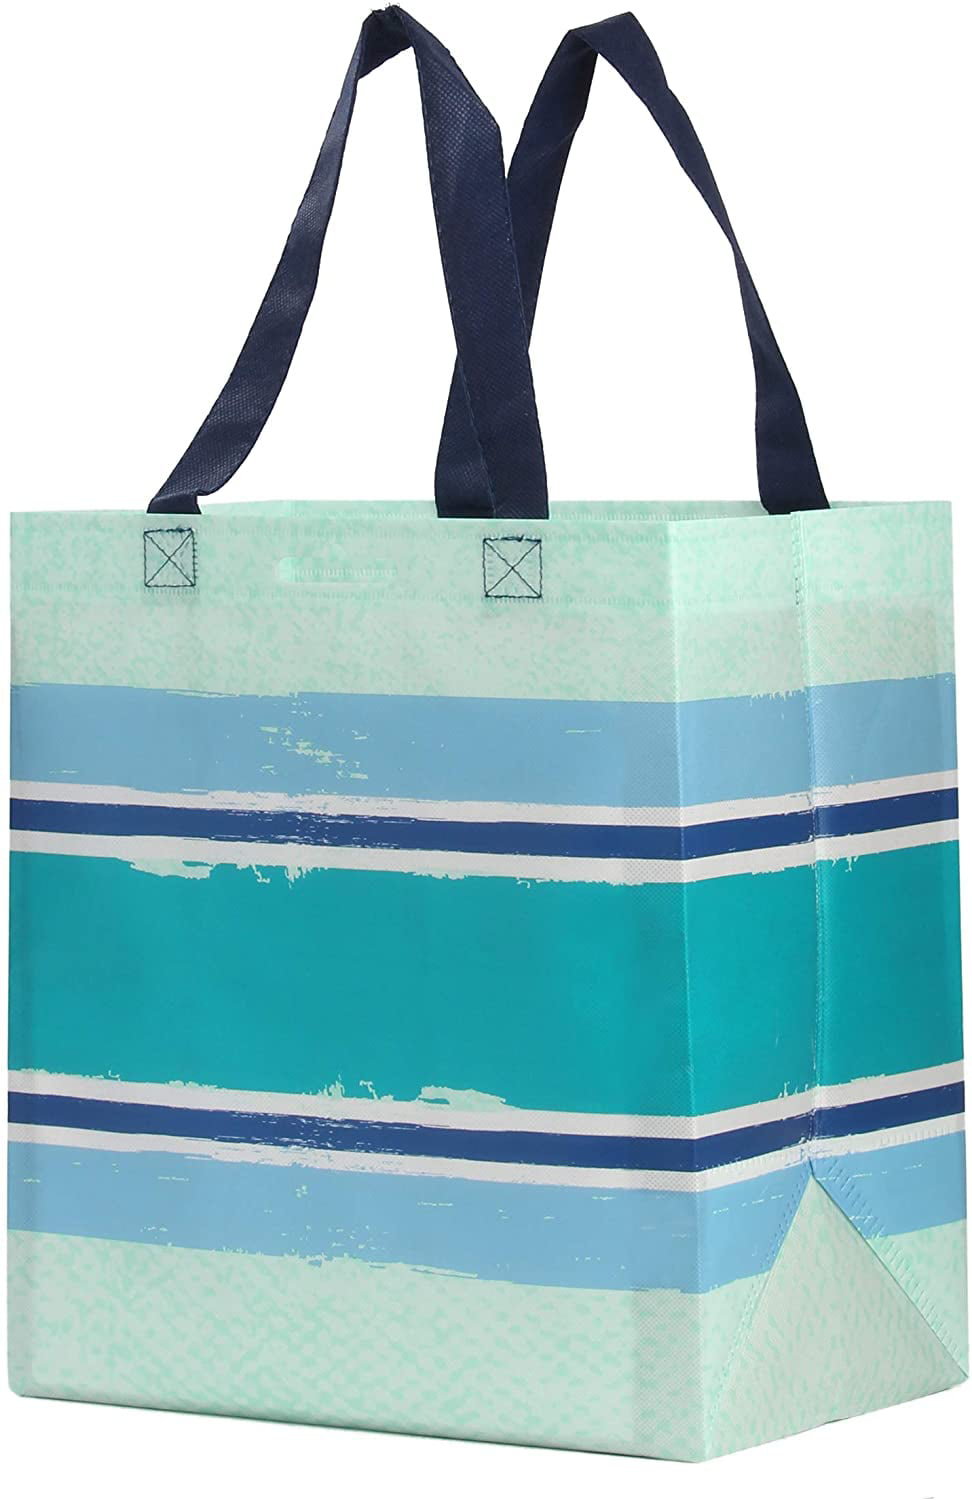 Details about   Earthwise Reusable Grocery Shopping Bags Durable Water Resistant Pack of 6 